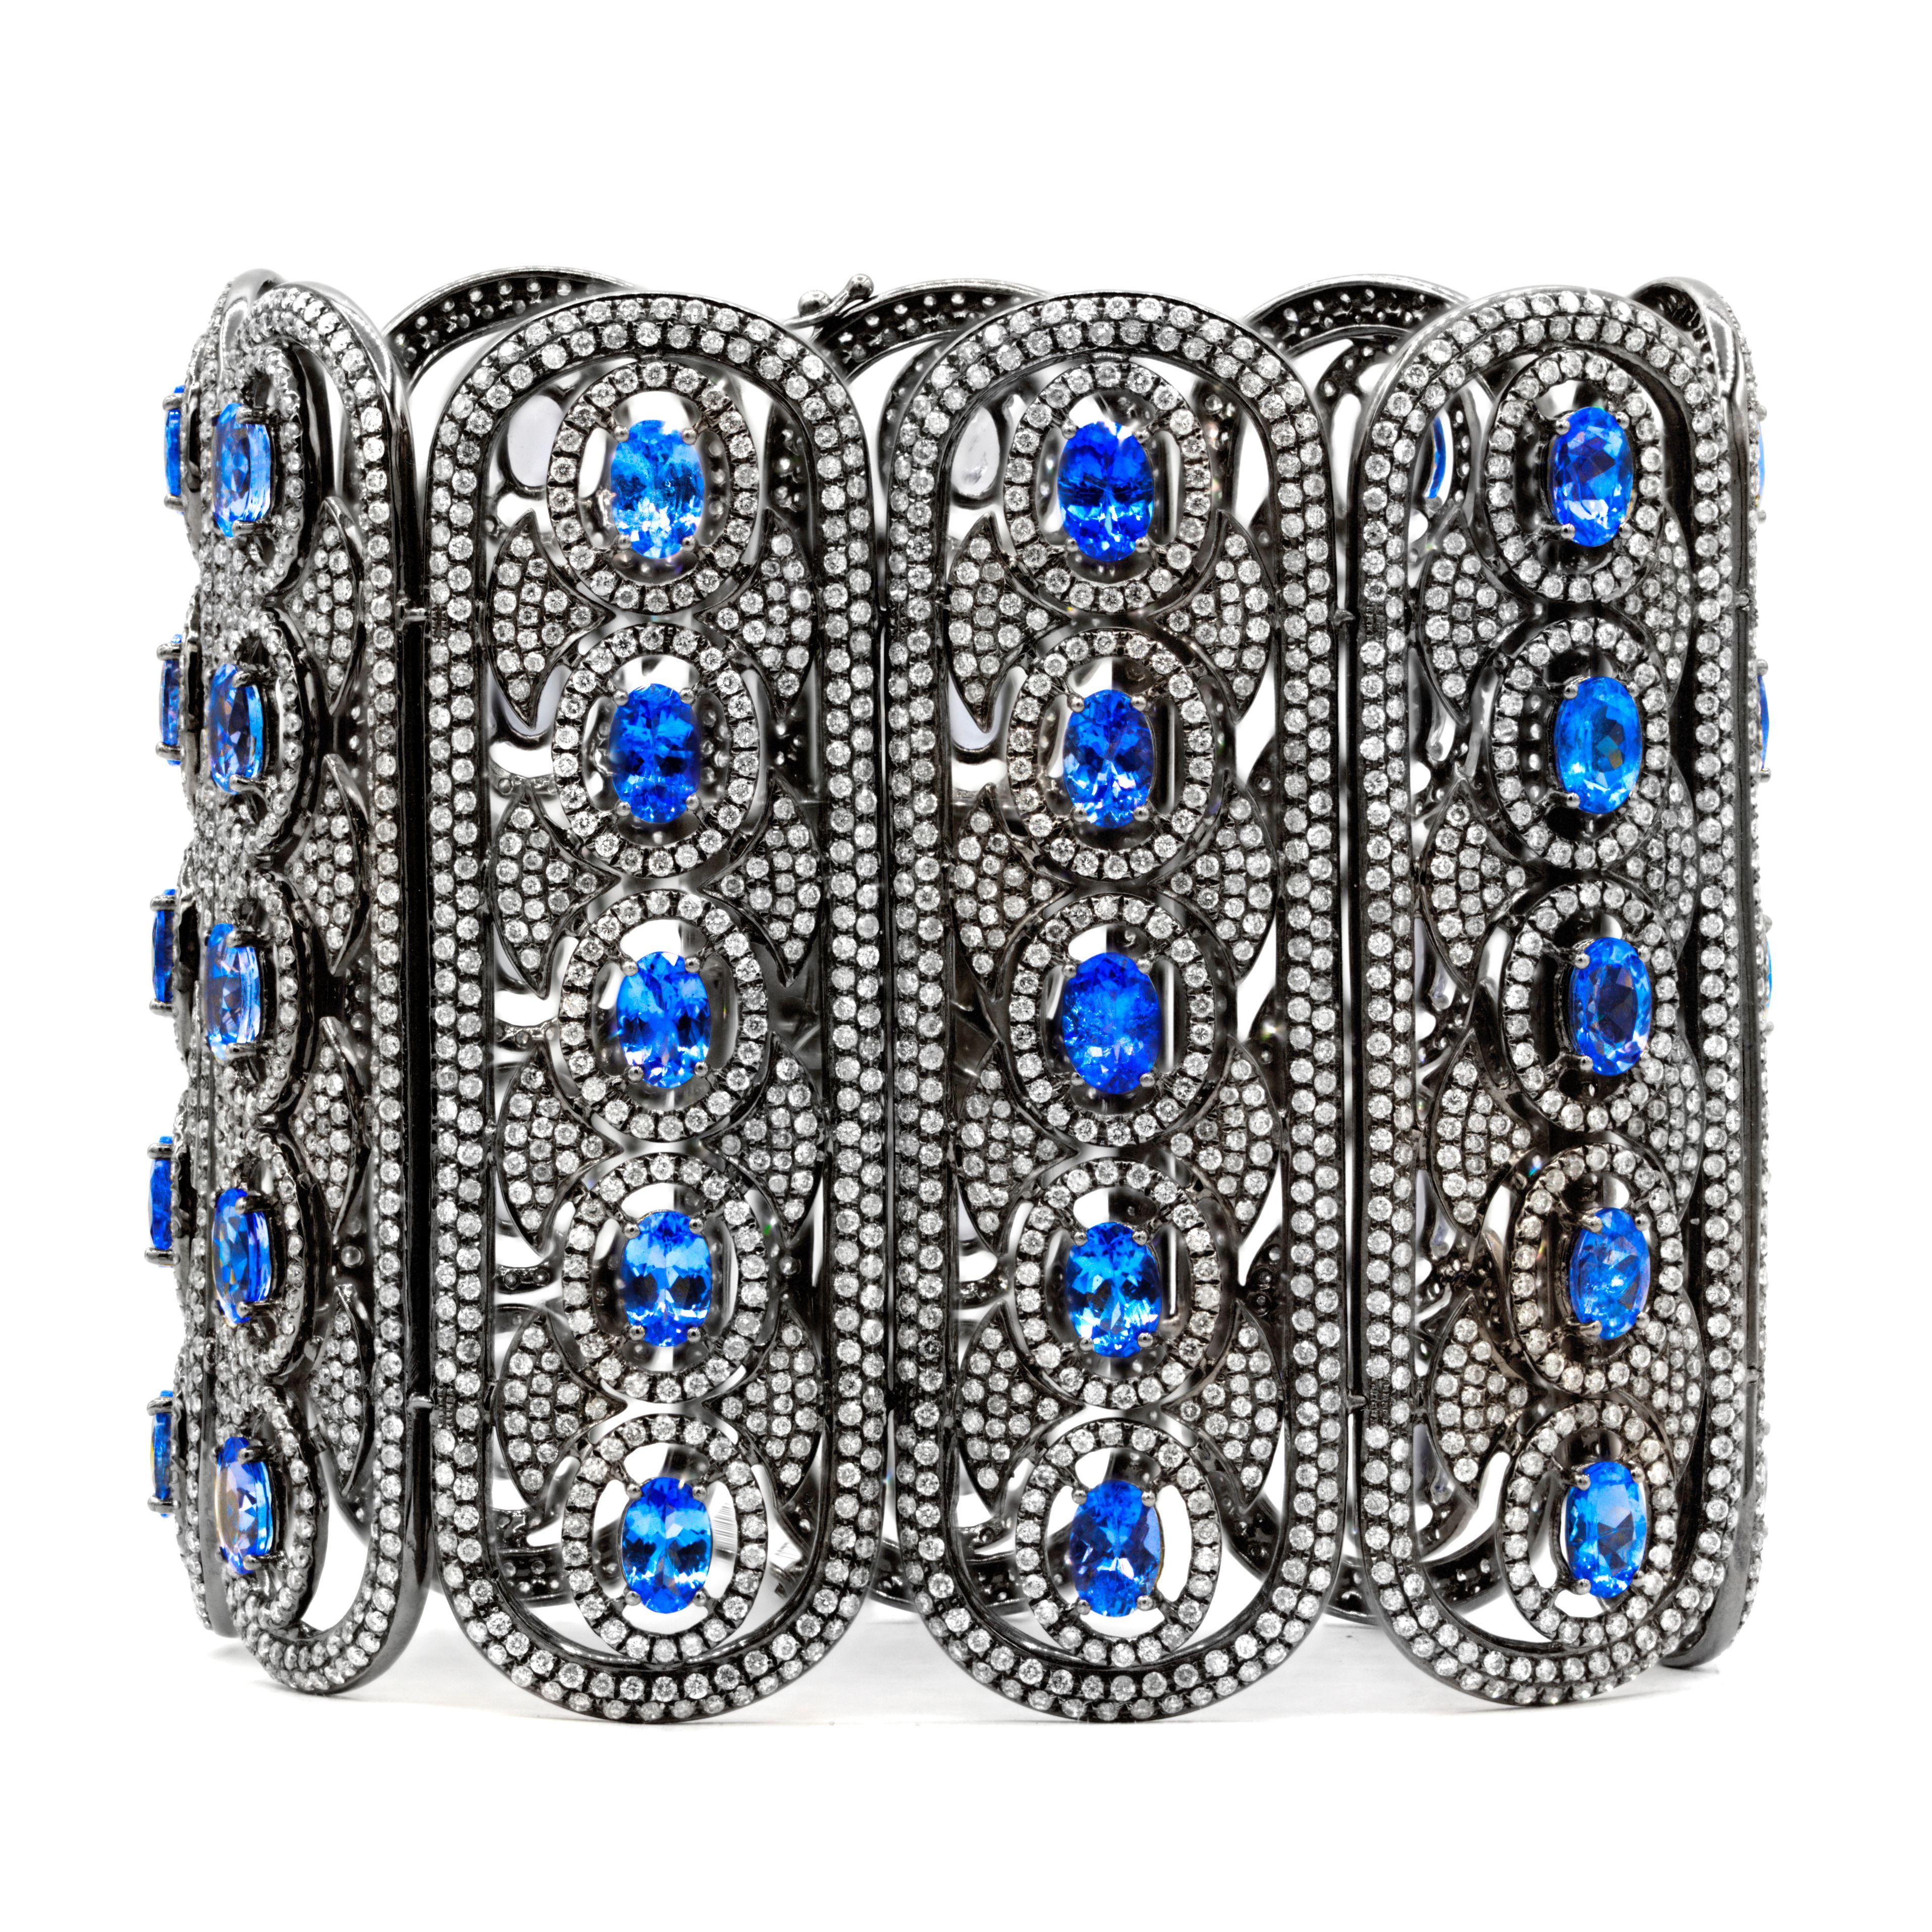 Wide 18K White gold with black rhodium soft cuff bracelet, features 22.97 Carats of Natural Tanzanites, surrounded by 20.52 Carats of Diamonds, F-G color SI in clarity. 2.5